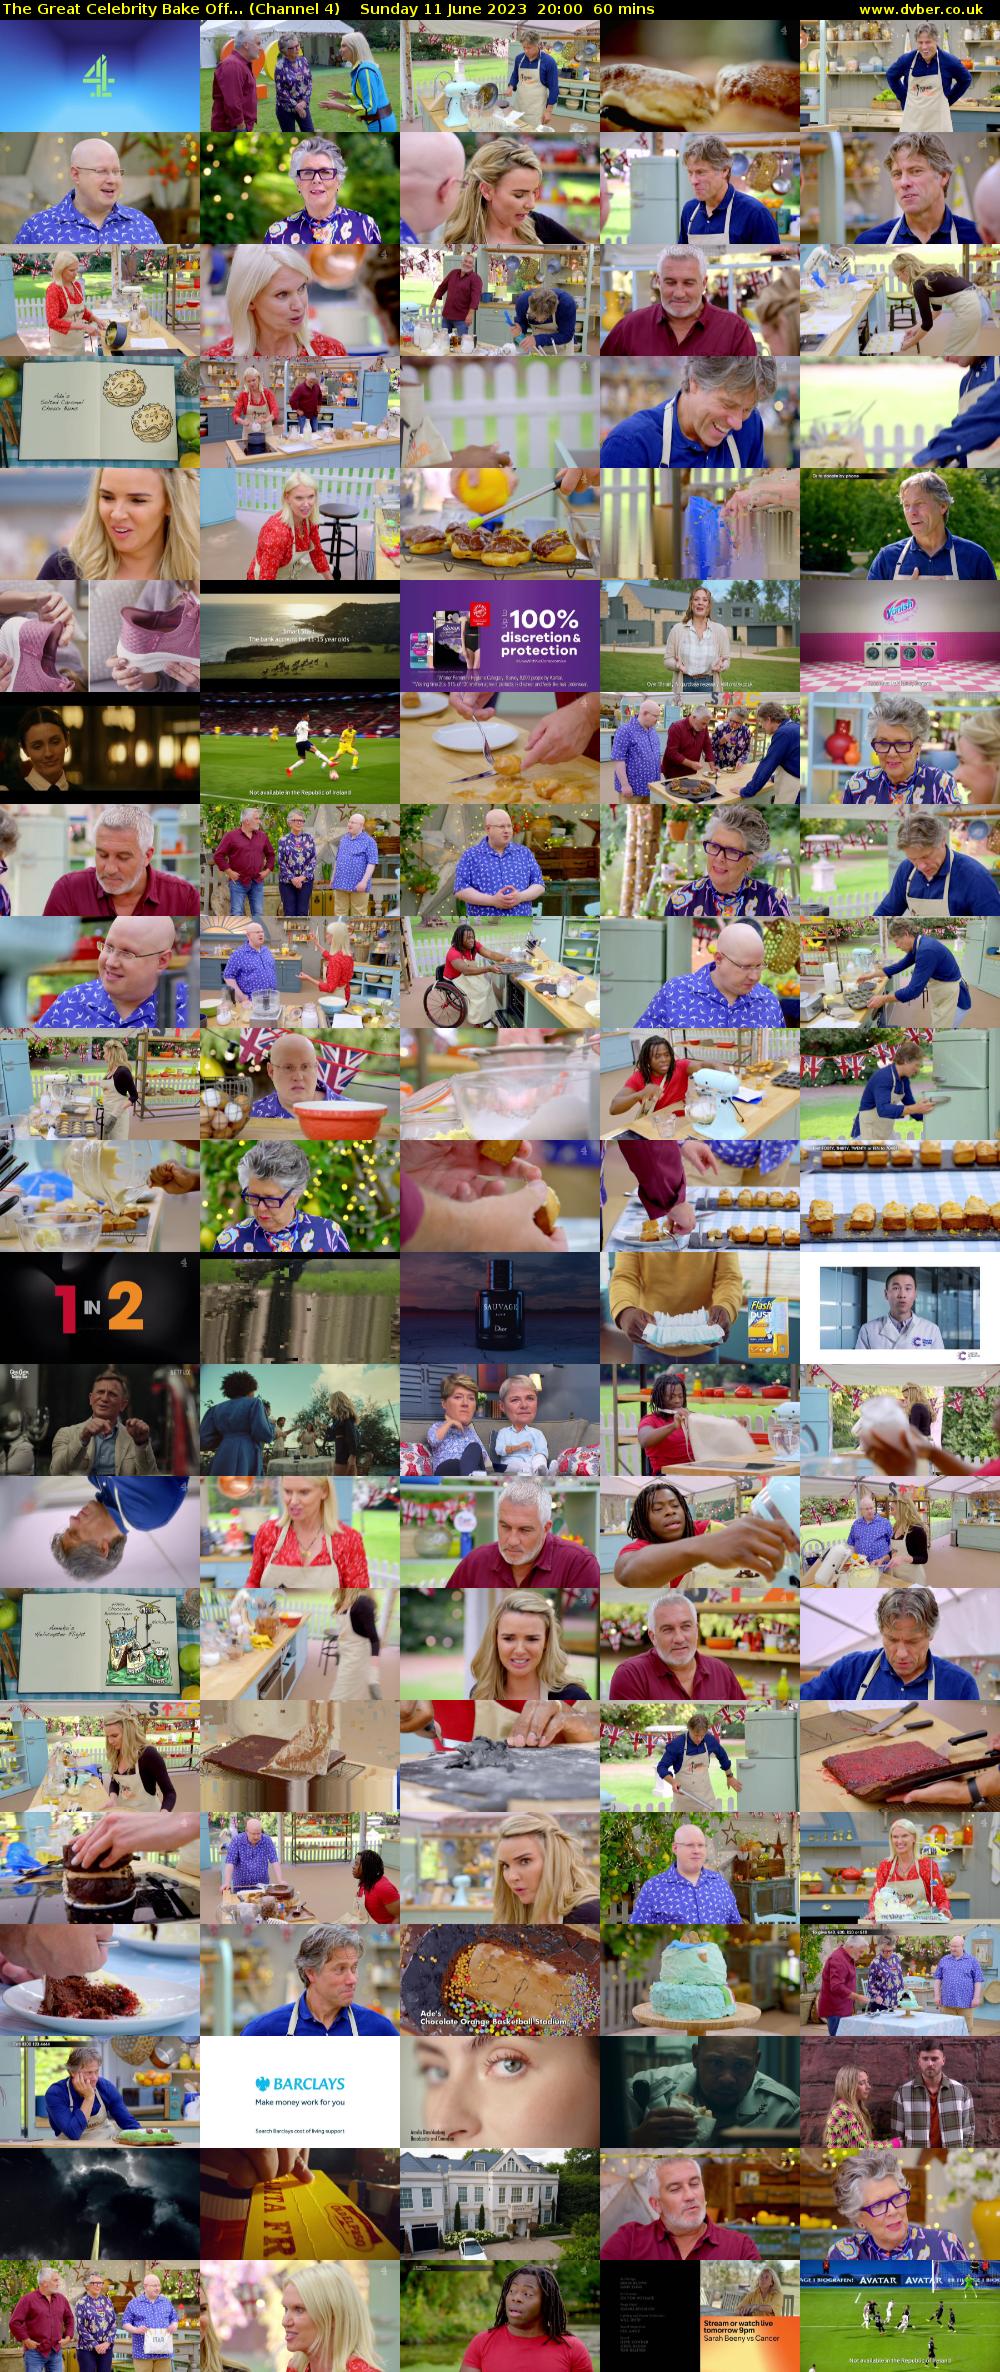 The Great Celebrity Bake Off... (Channel 4) Sunday 11 June 2023 20:00 - 21:00